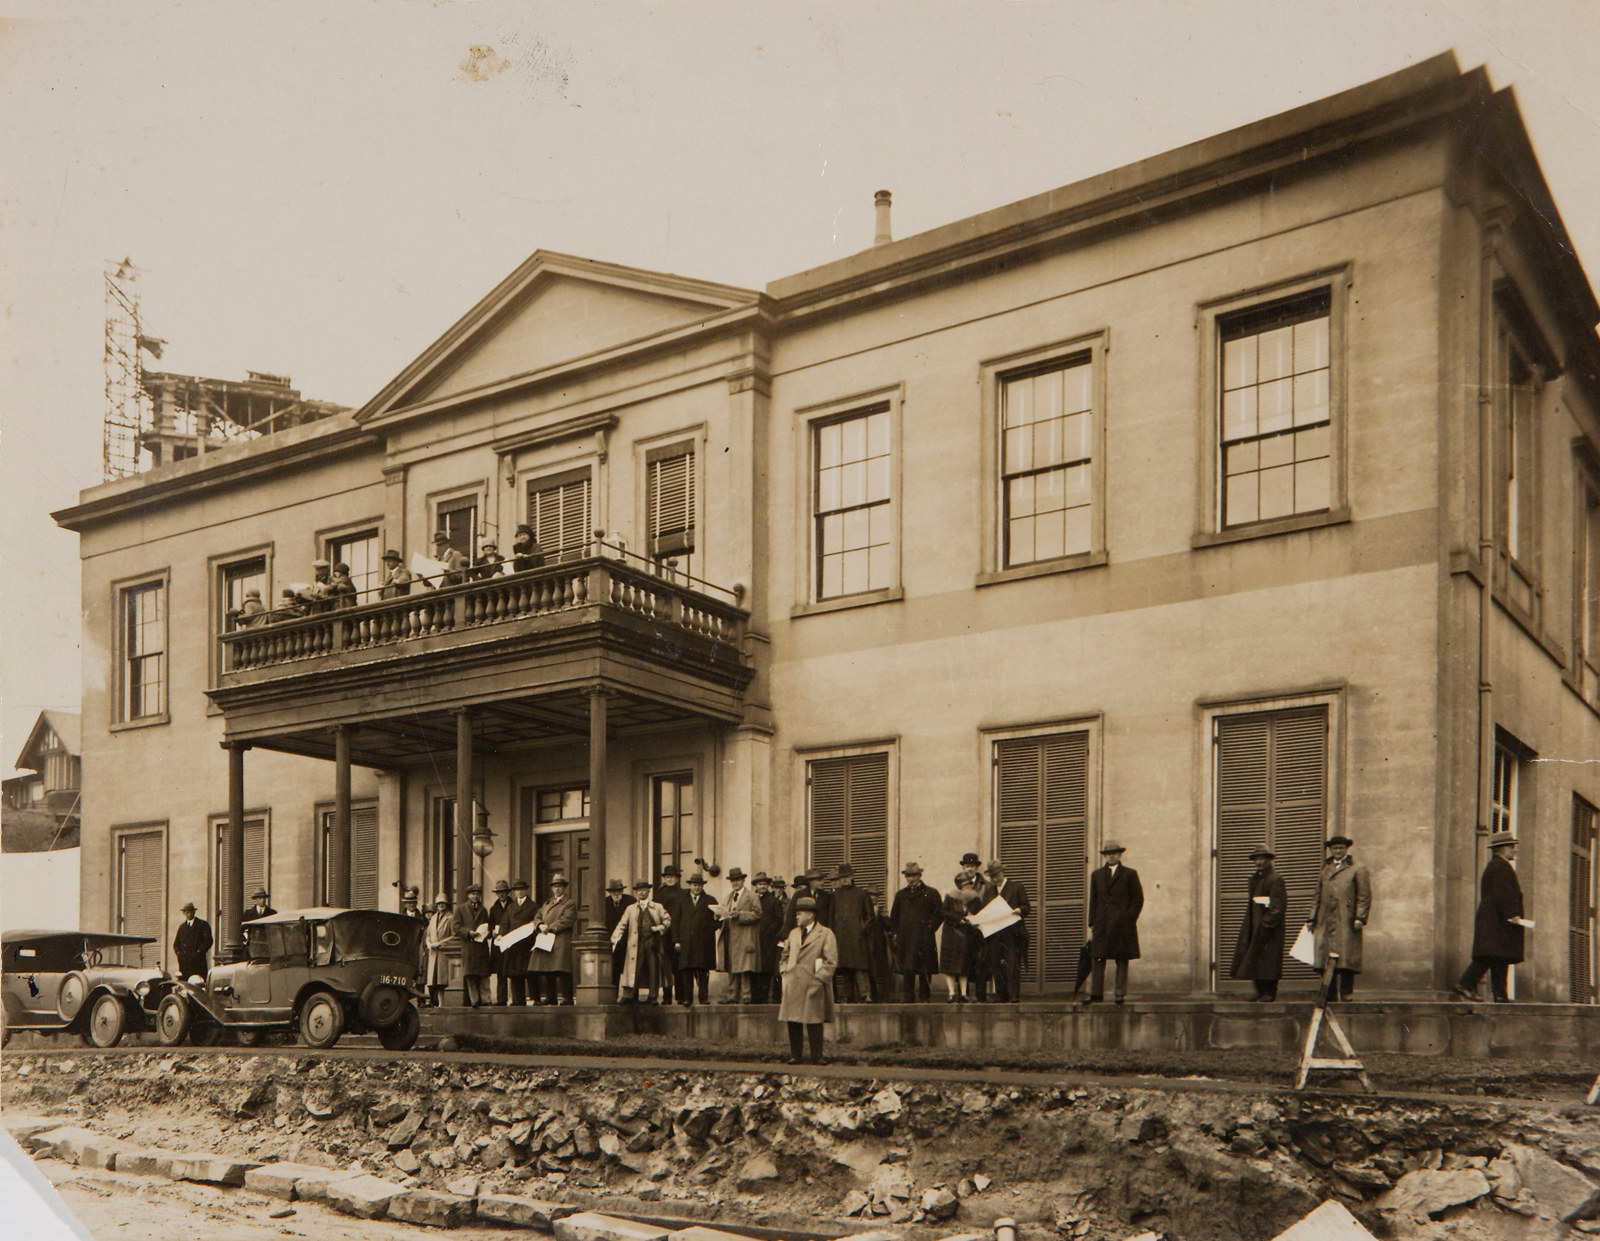 B/w photo of a large group of people standing in front of Elizabeth Bay House, with roadworks underway in front of the building.